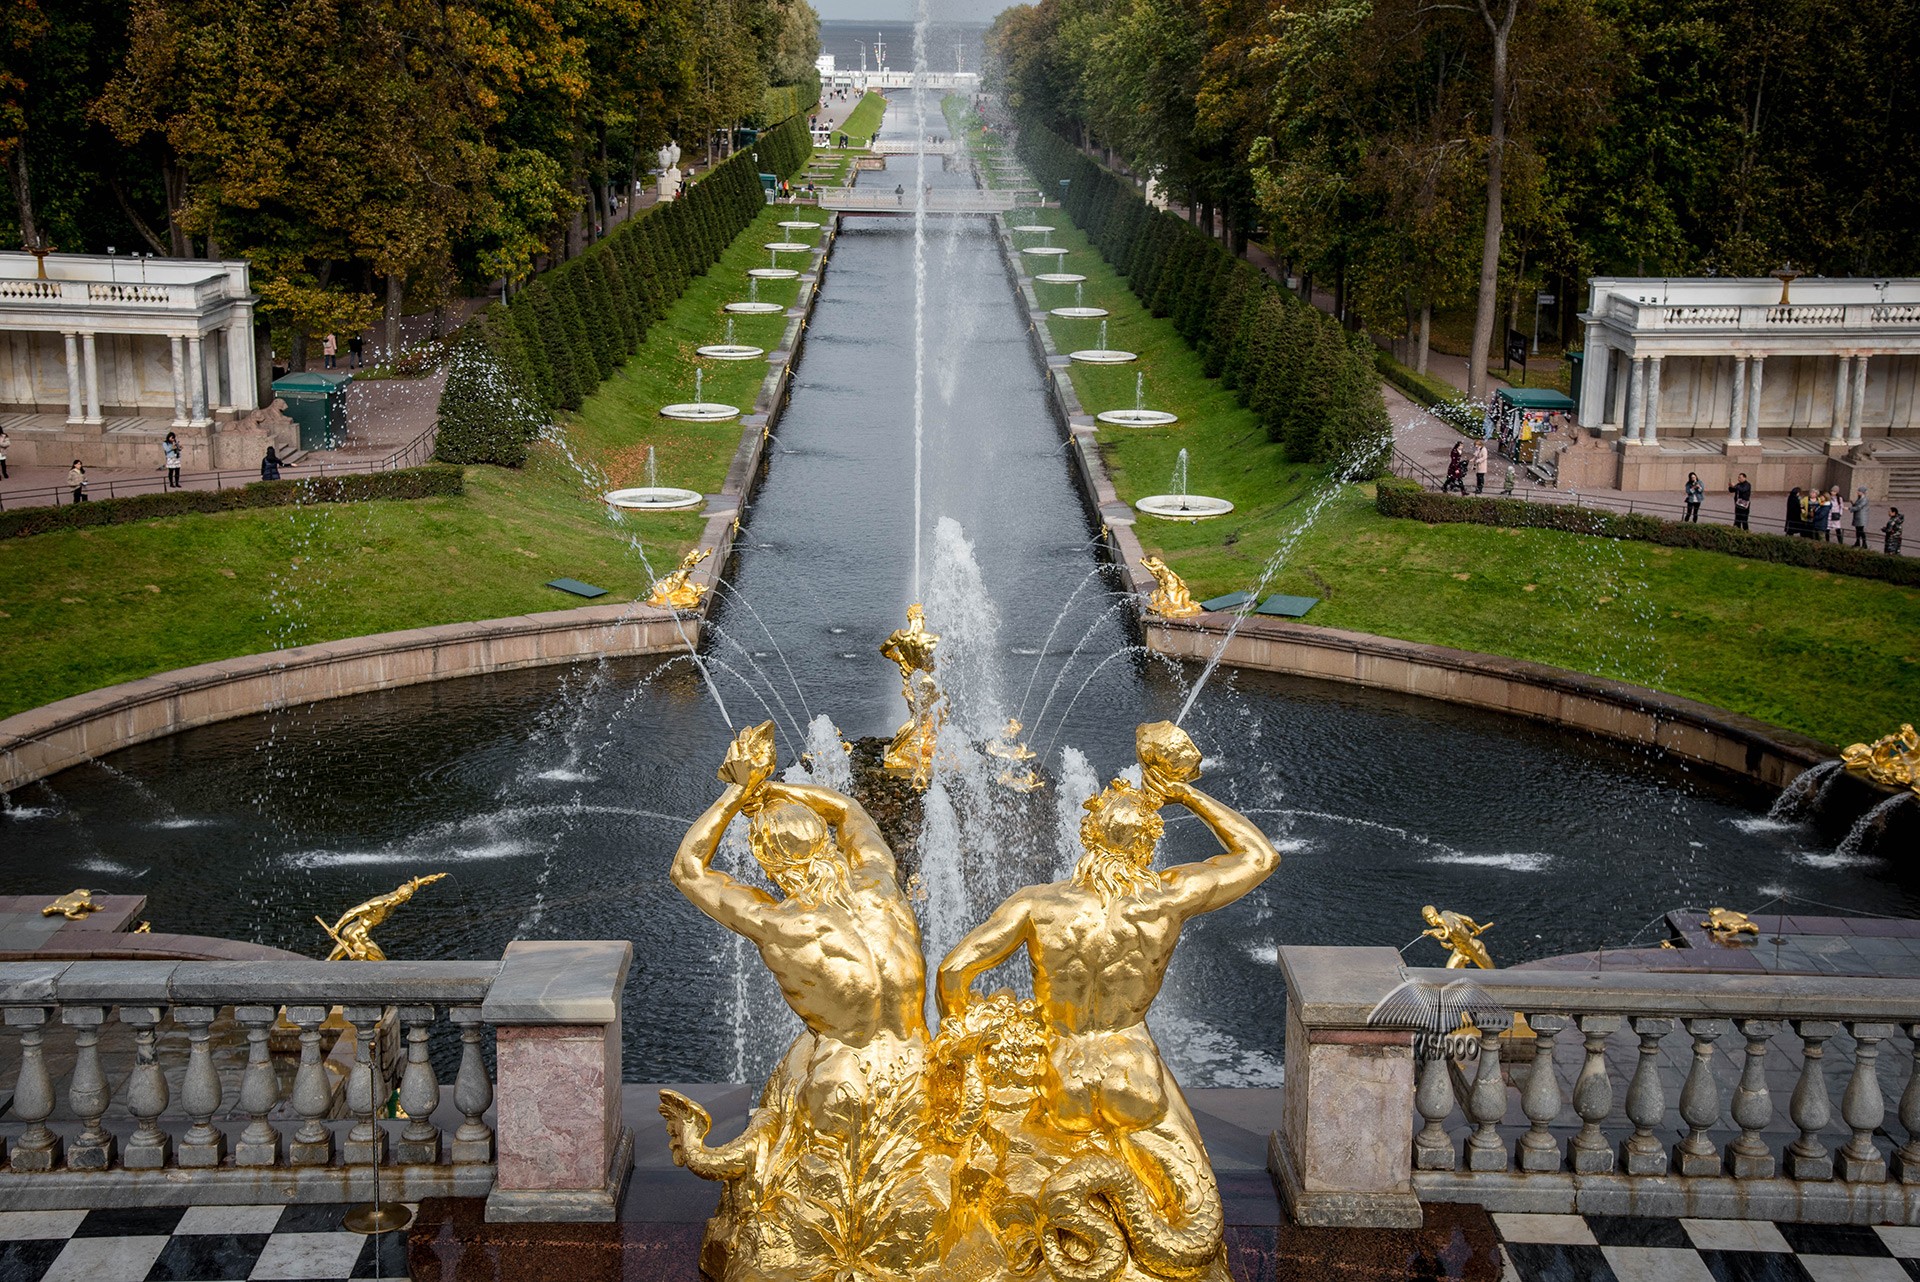 Back of the Fountain